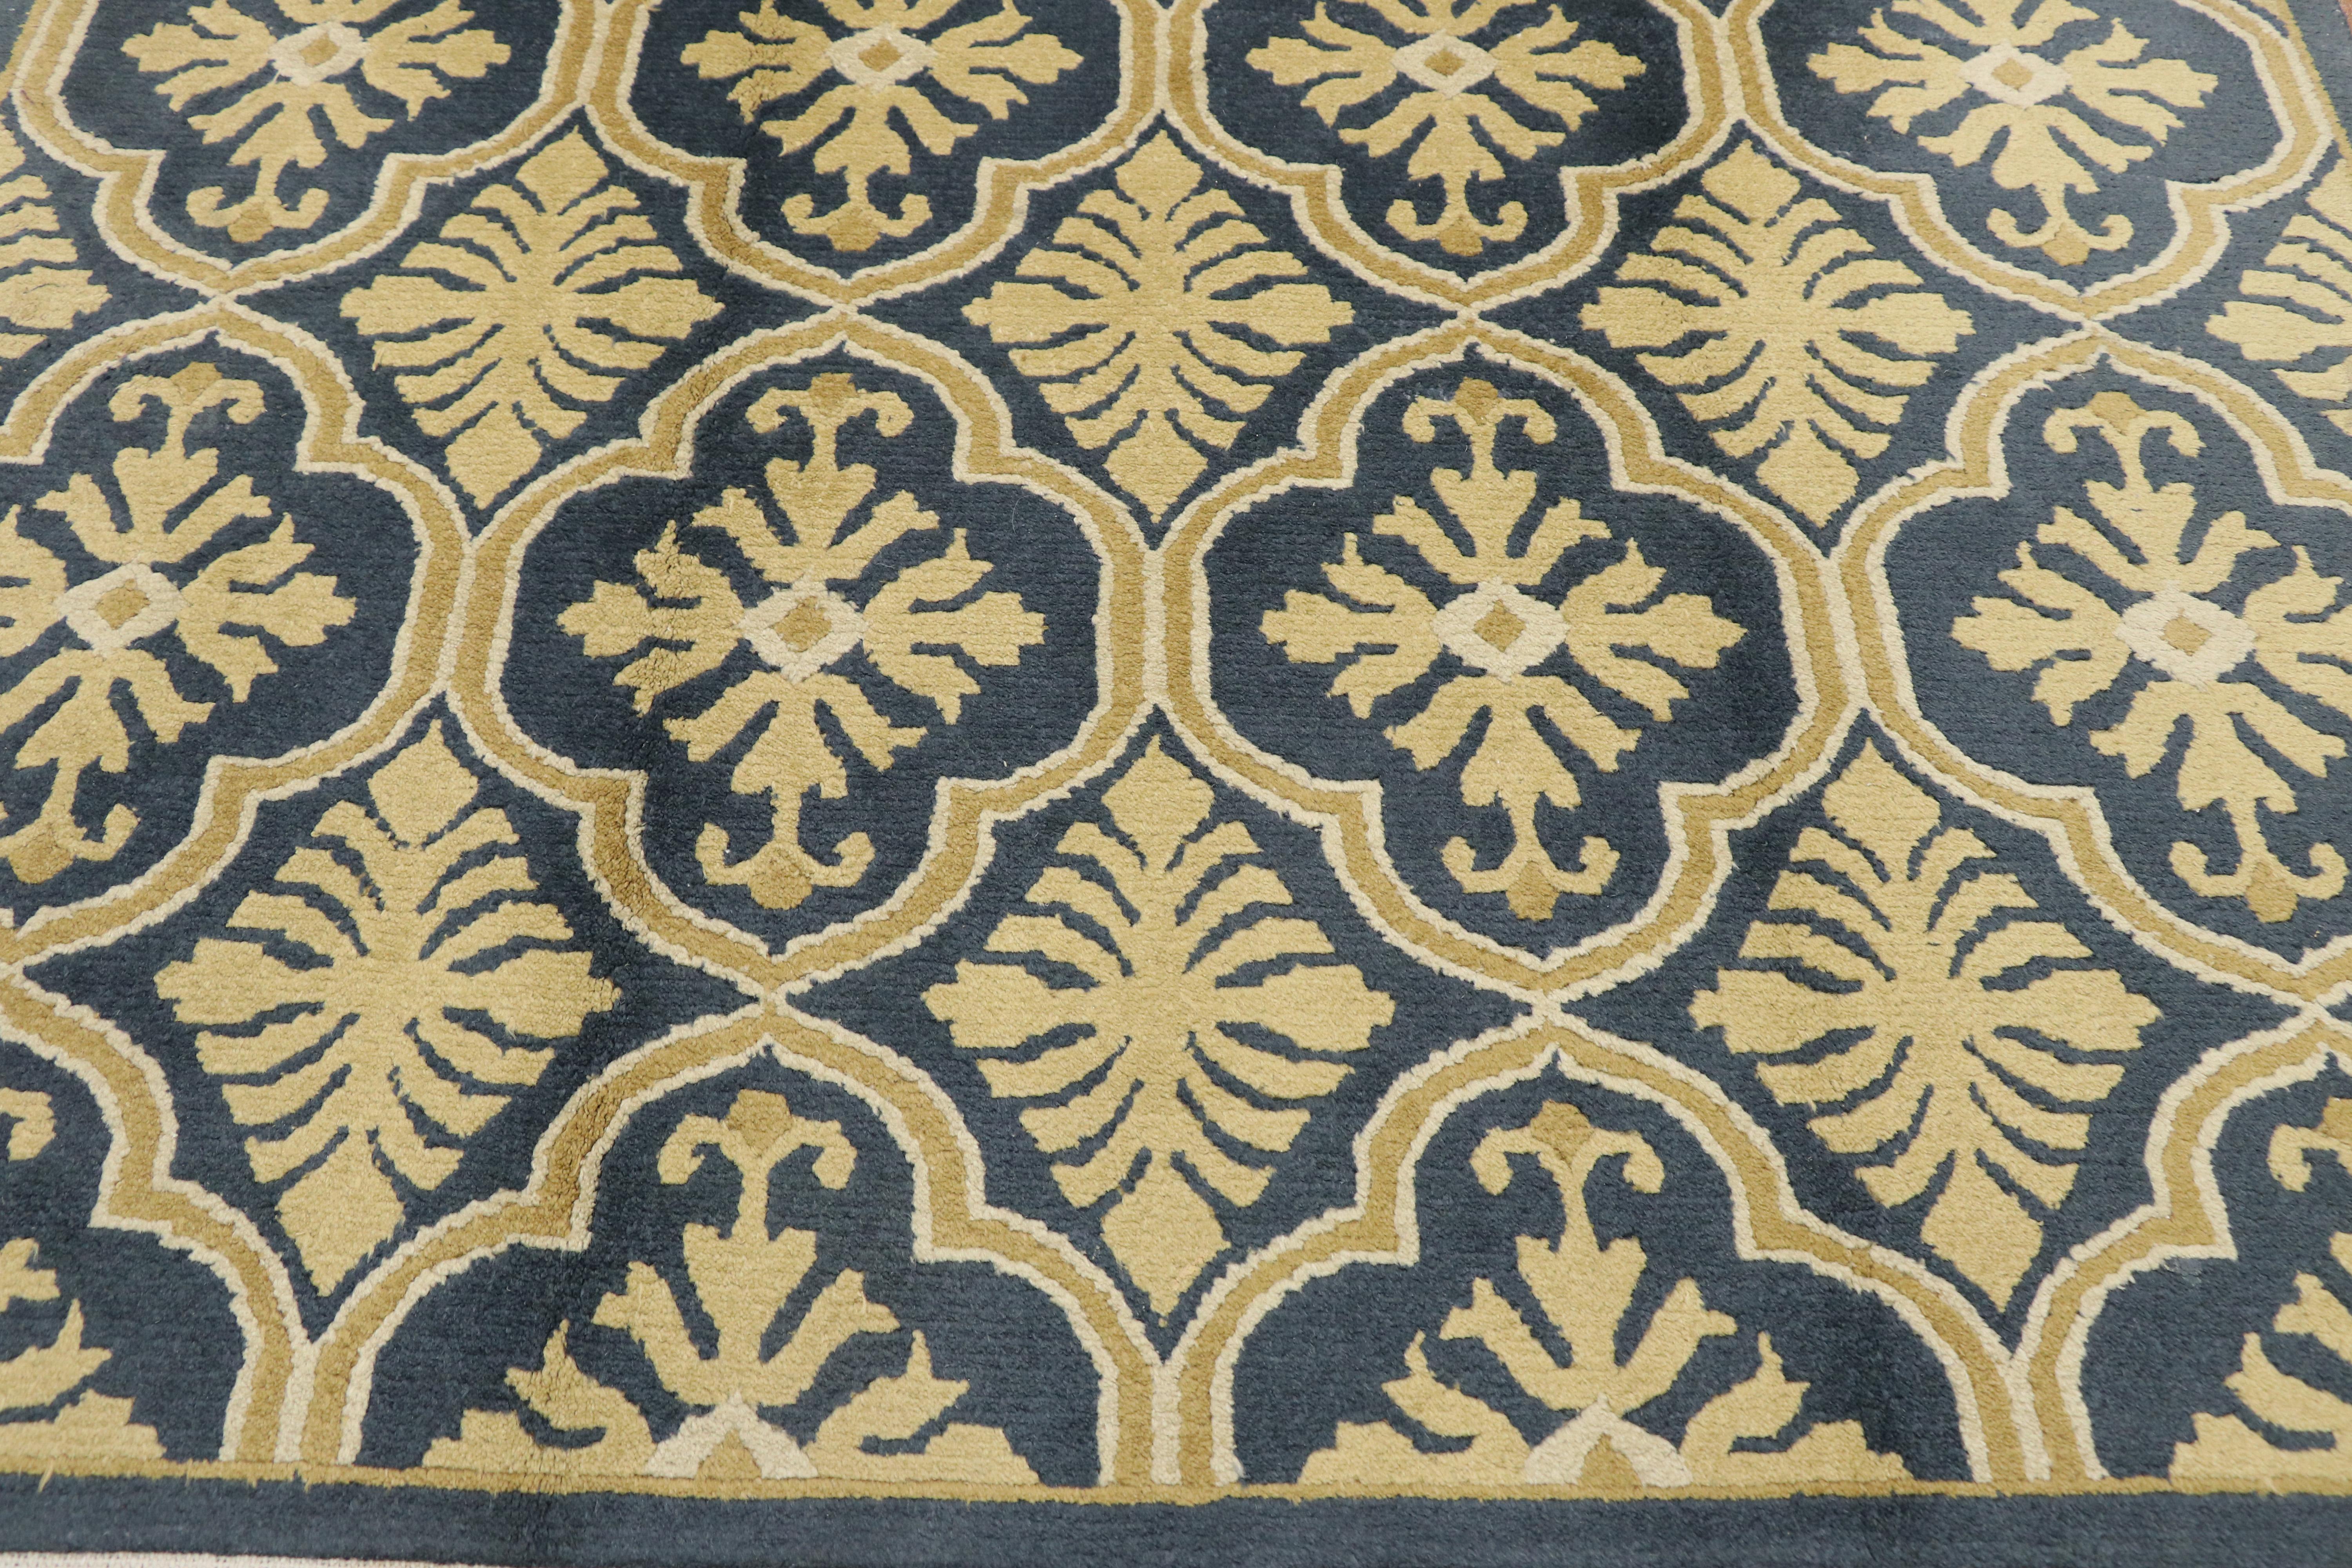 Vintage Transitional Quatrefoil Geometric Rug with Hollywood Regency Style In Good Condition For Sale In Dallas, TX